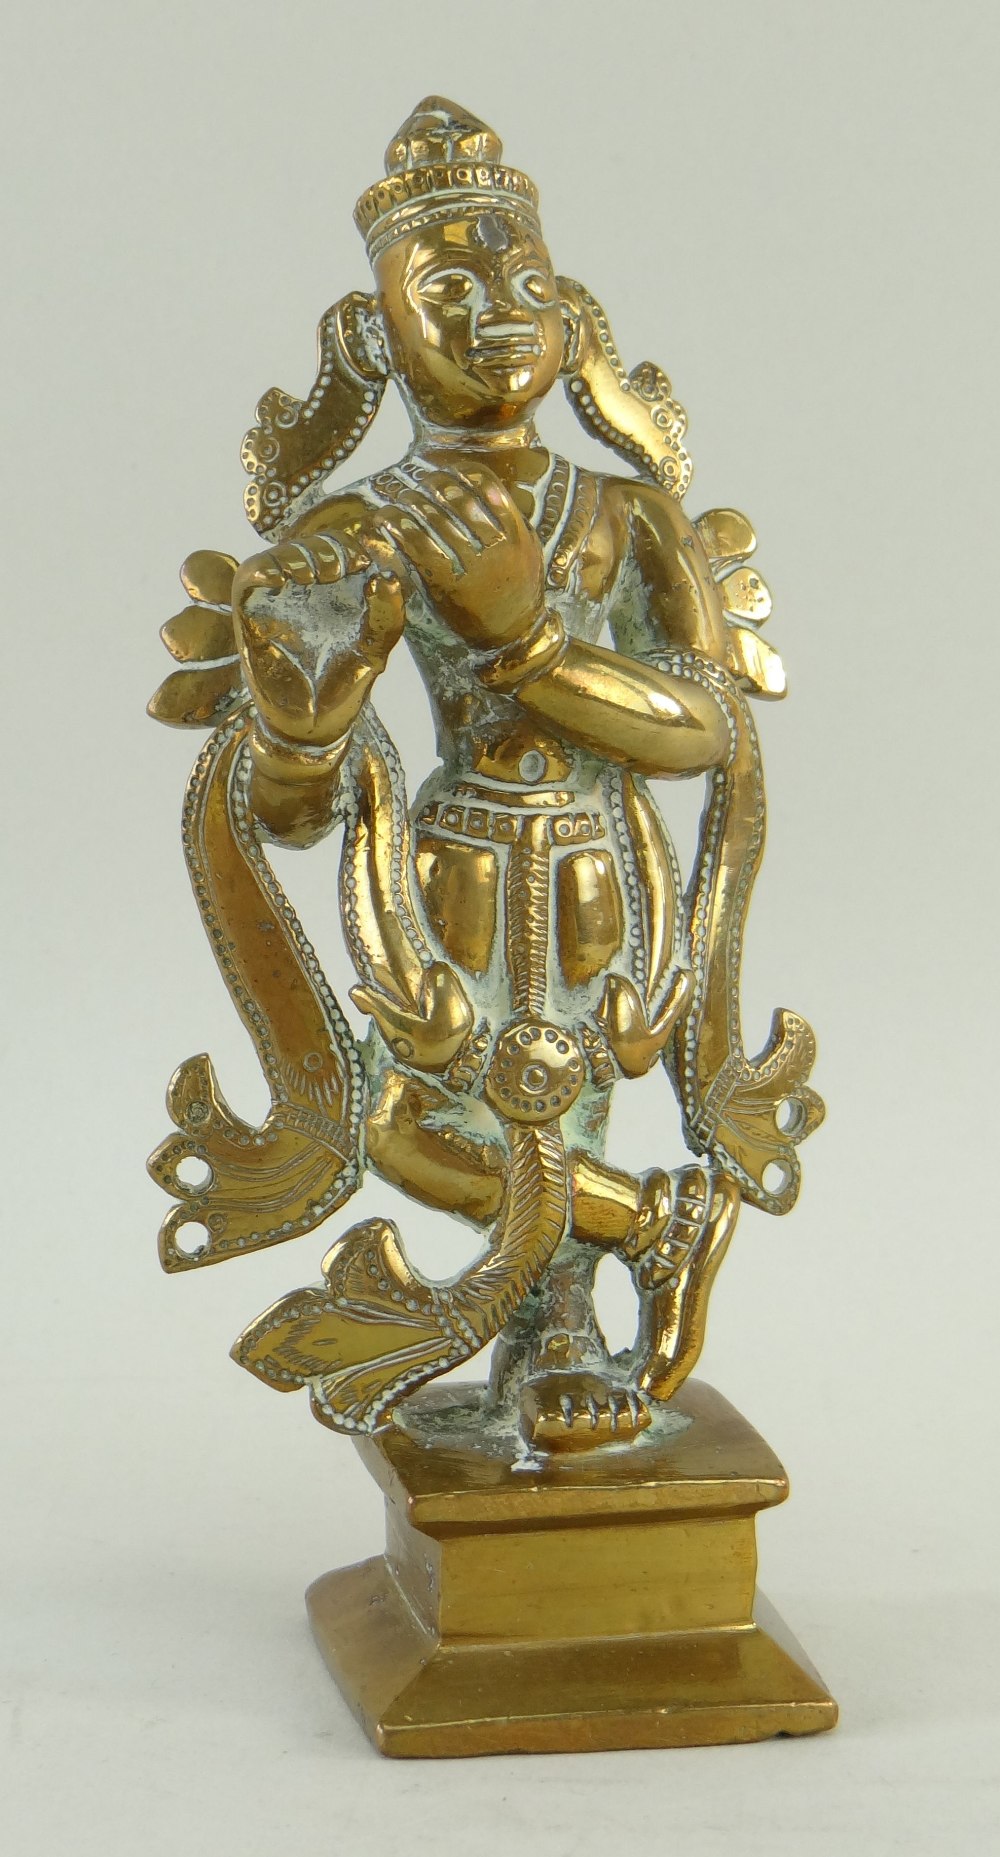 BRONZE FIGURE OF KRISHNA PLAYING THE FLUTE on stepped plinth base, 15cms high Condition: flute